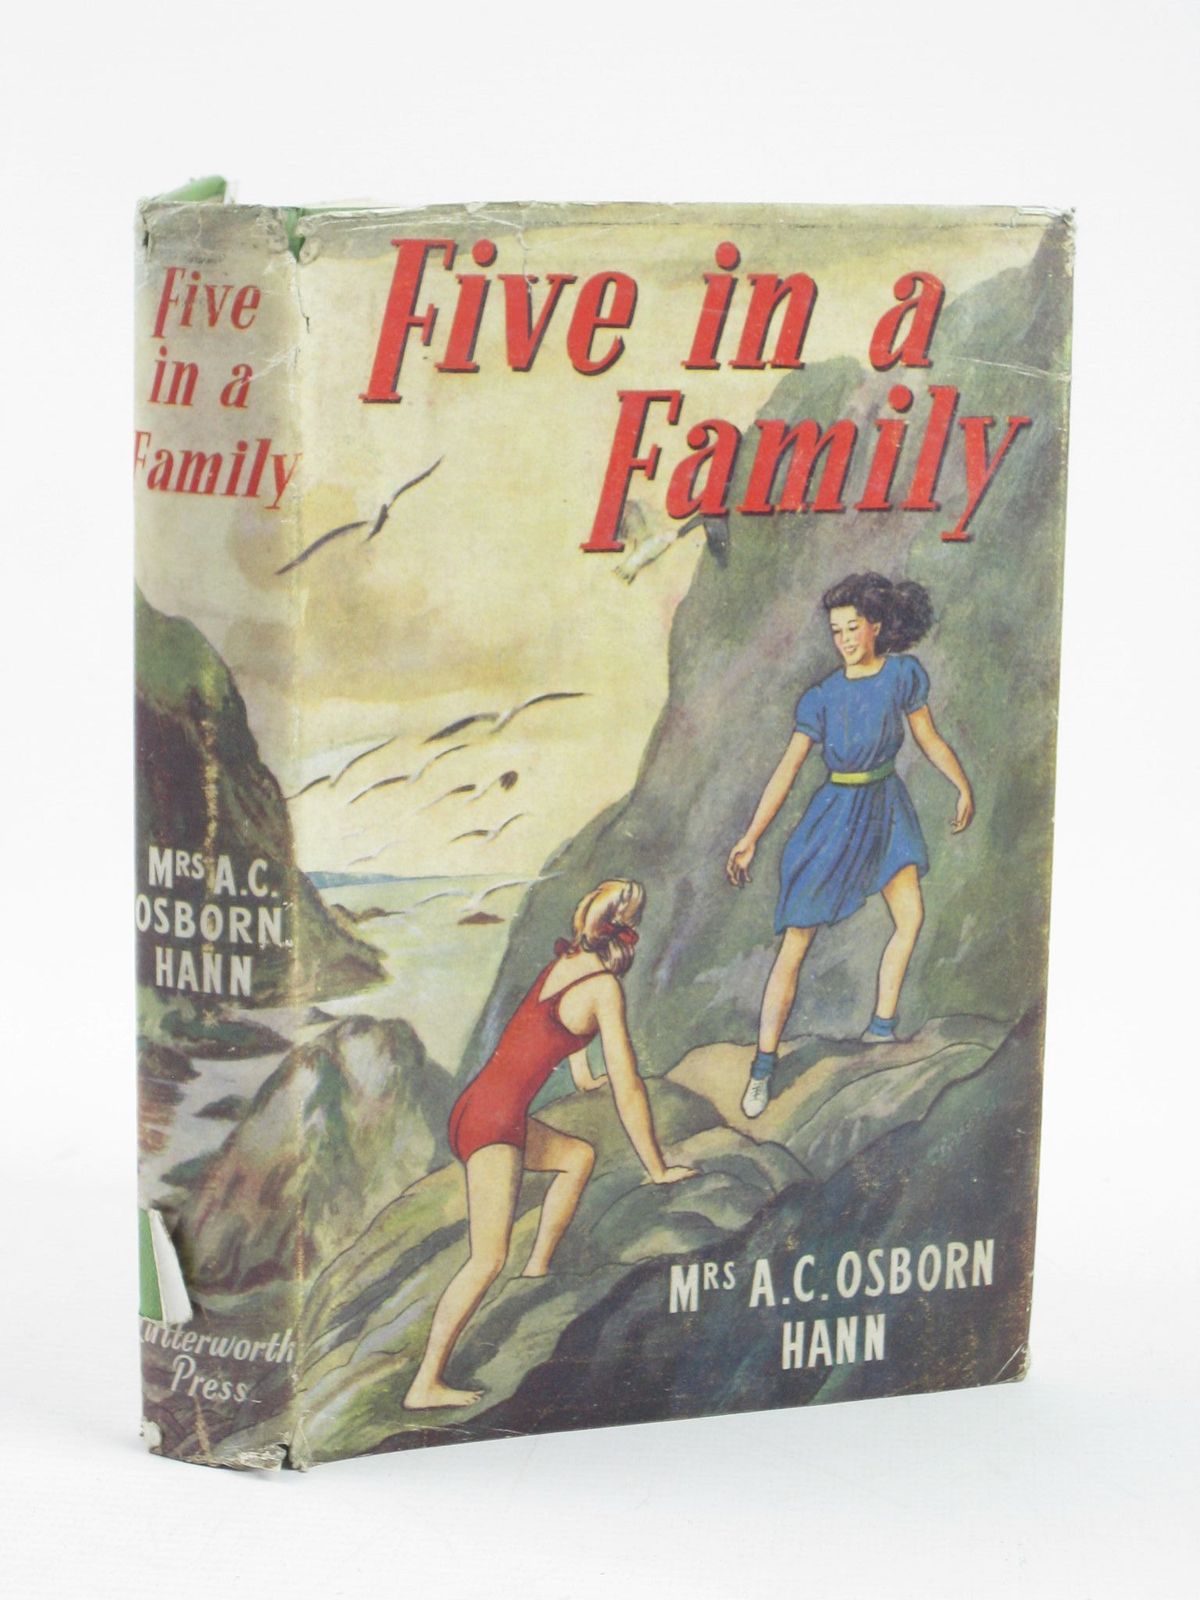 Cover of FIVE IN A FAMILY by Mrs. A.C. Osborn Hann